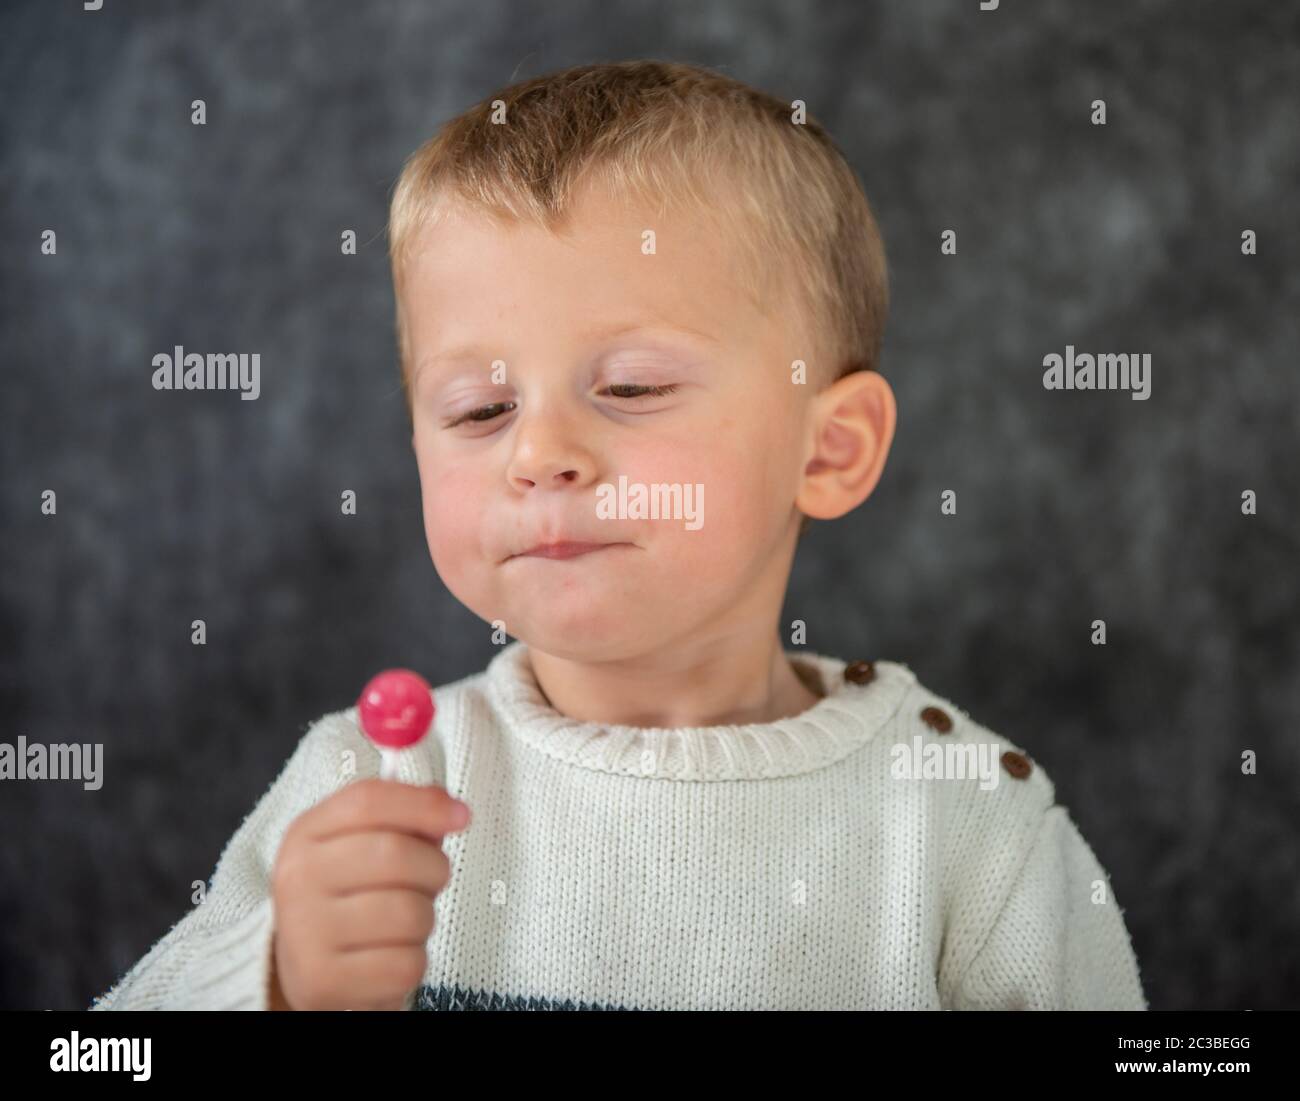 a cute child is eating a lollipop Stock Photo